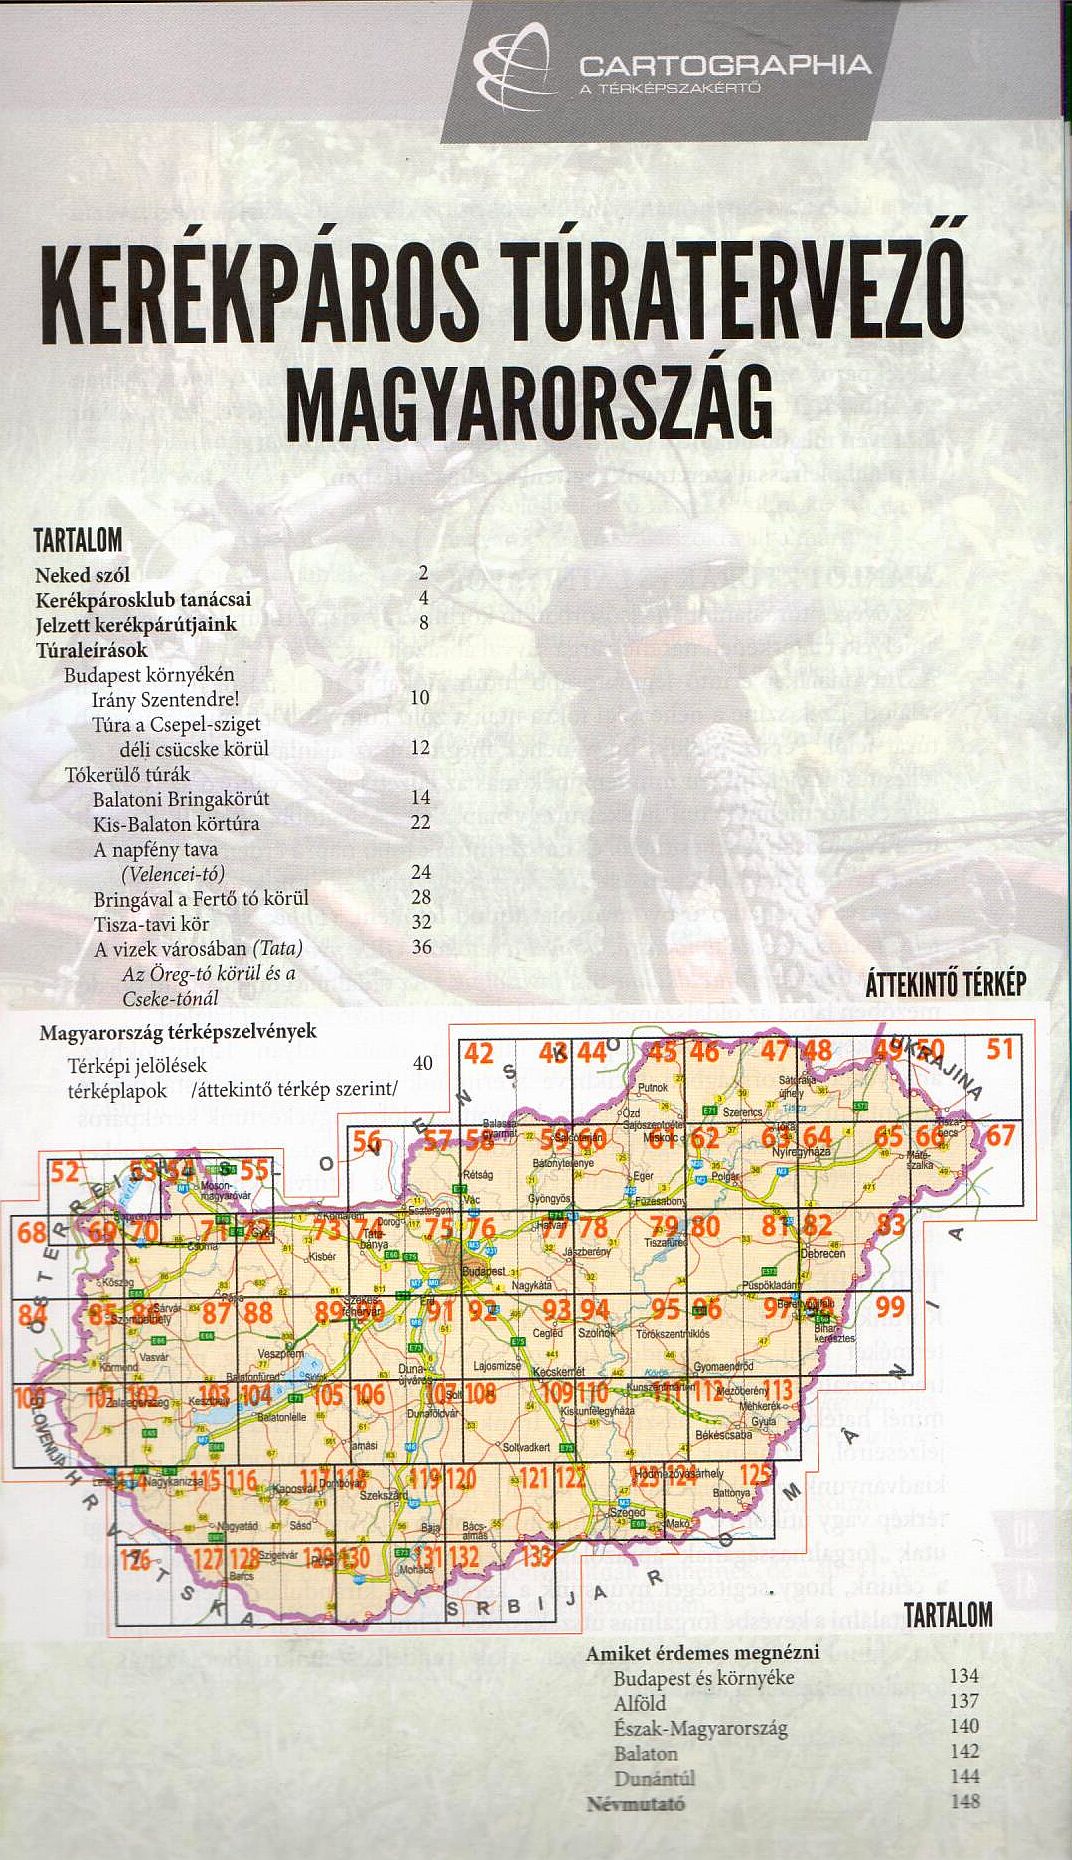 Hungary cycling guide/atlas: contents